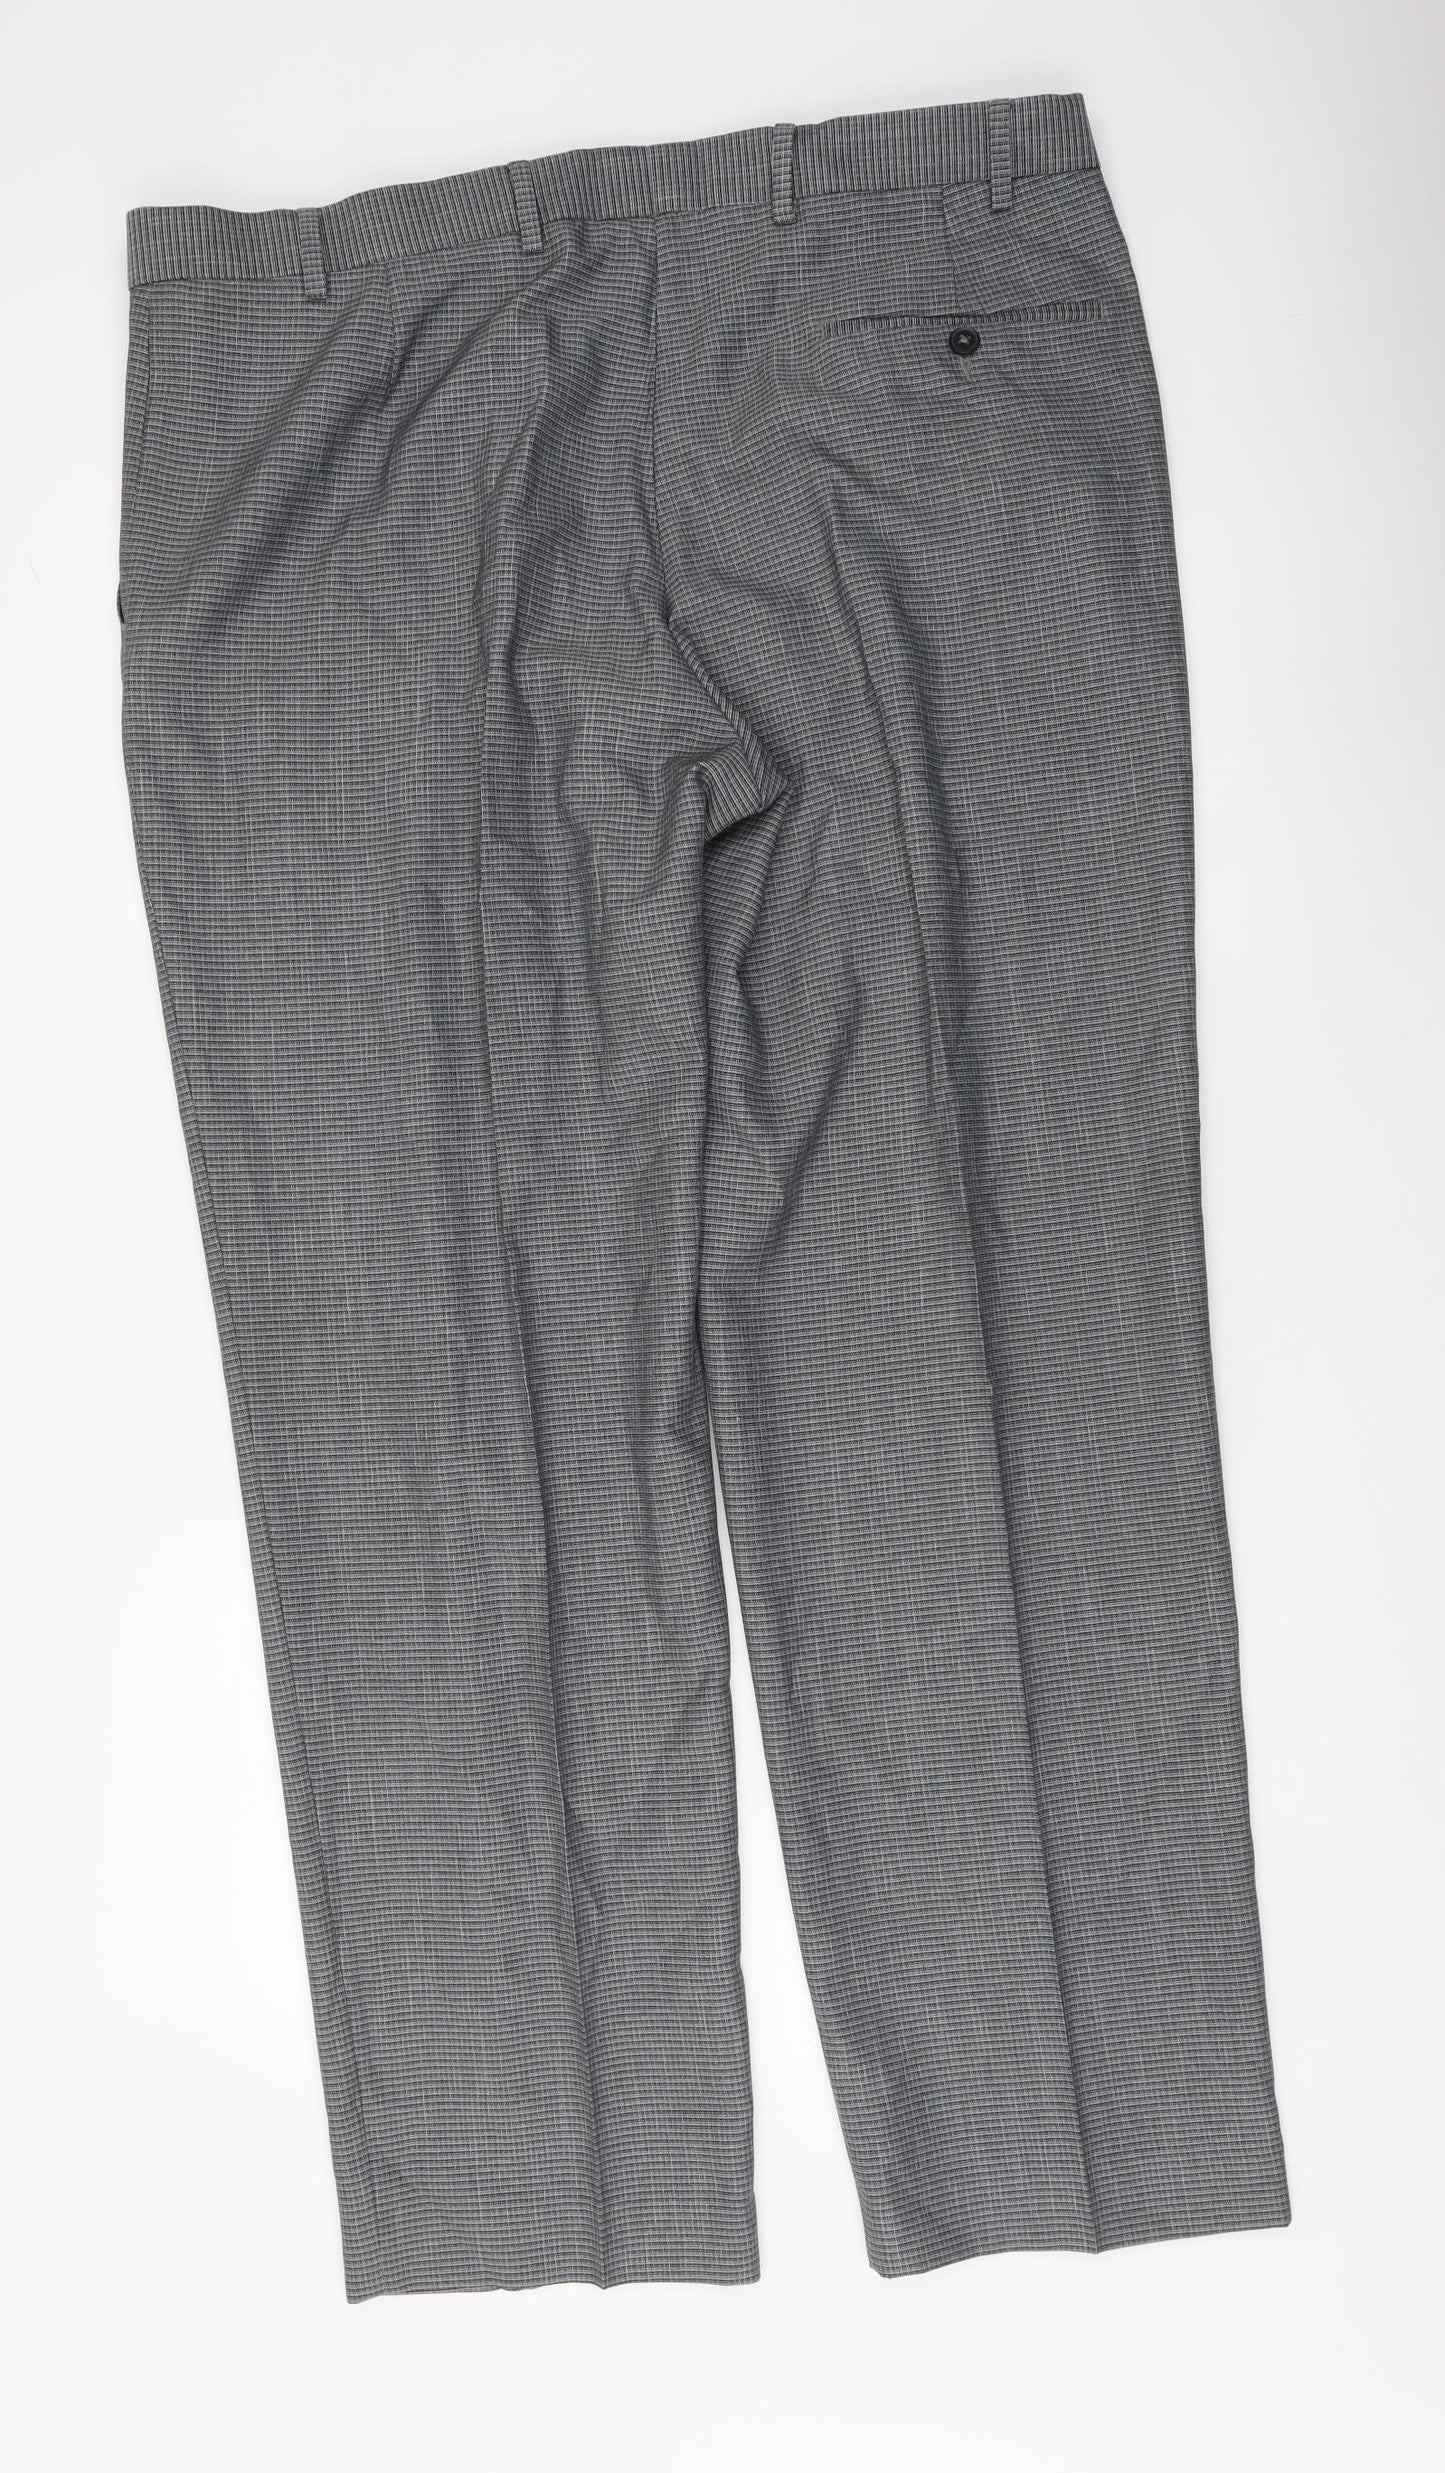 Marks and Spencer Mens Grey Plaid Polyester Dress Pants Trousers Size 38 in L31 in Regular Button